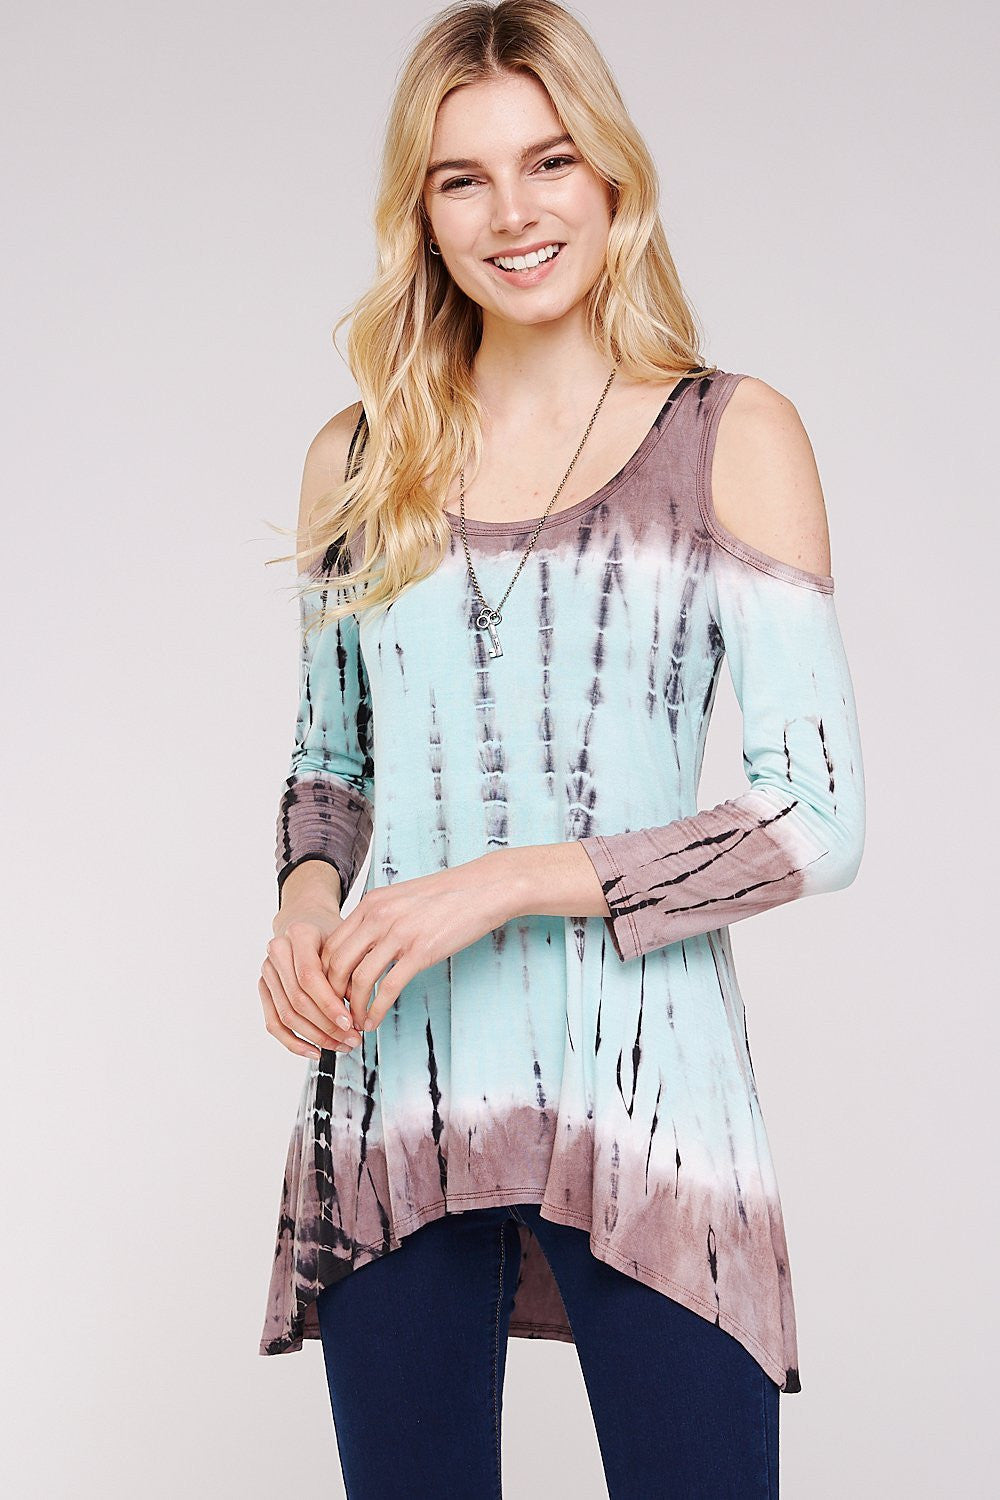 Amazing Mocha & Mint Bamboo Tie-dye cold shoulder 3/4 sleeve tunic Urban x clothing-urban x apparel-boutique online-fashion district wholesale-tie dye tops-tie dye-women apparel-women clothes-tops-summer trends-summer vibe